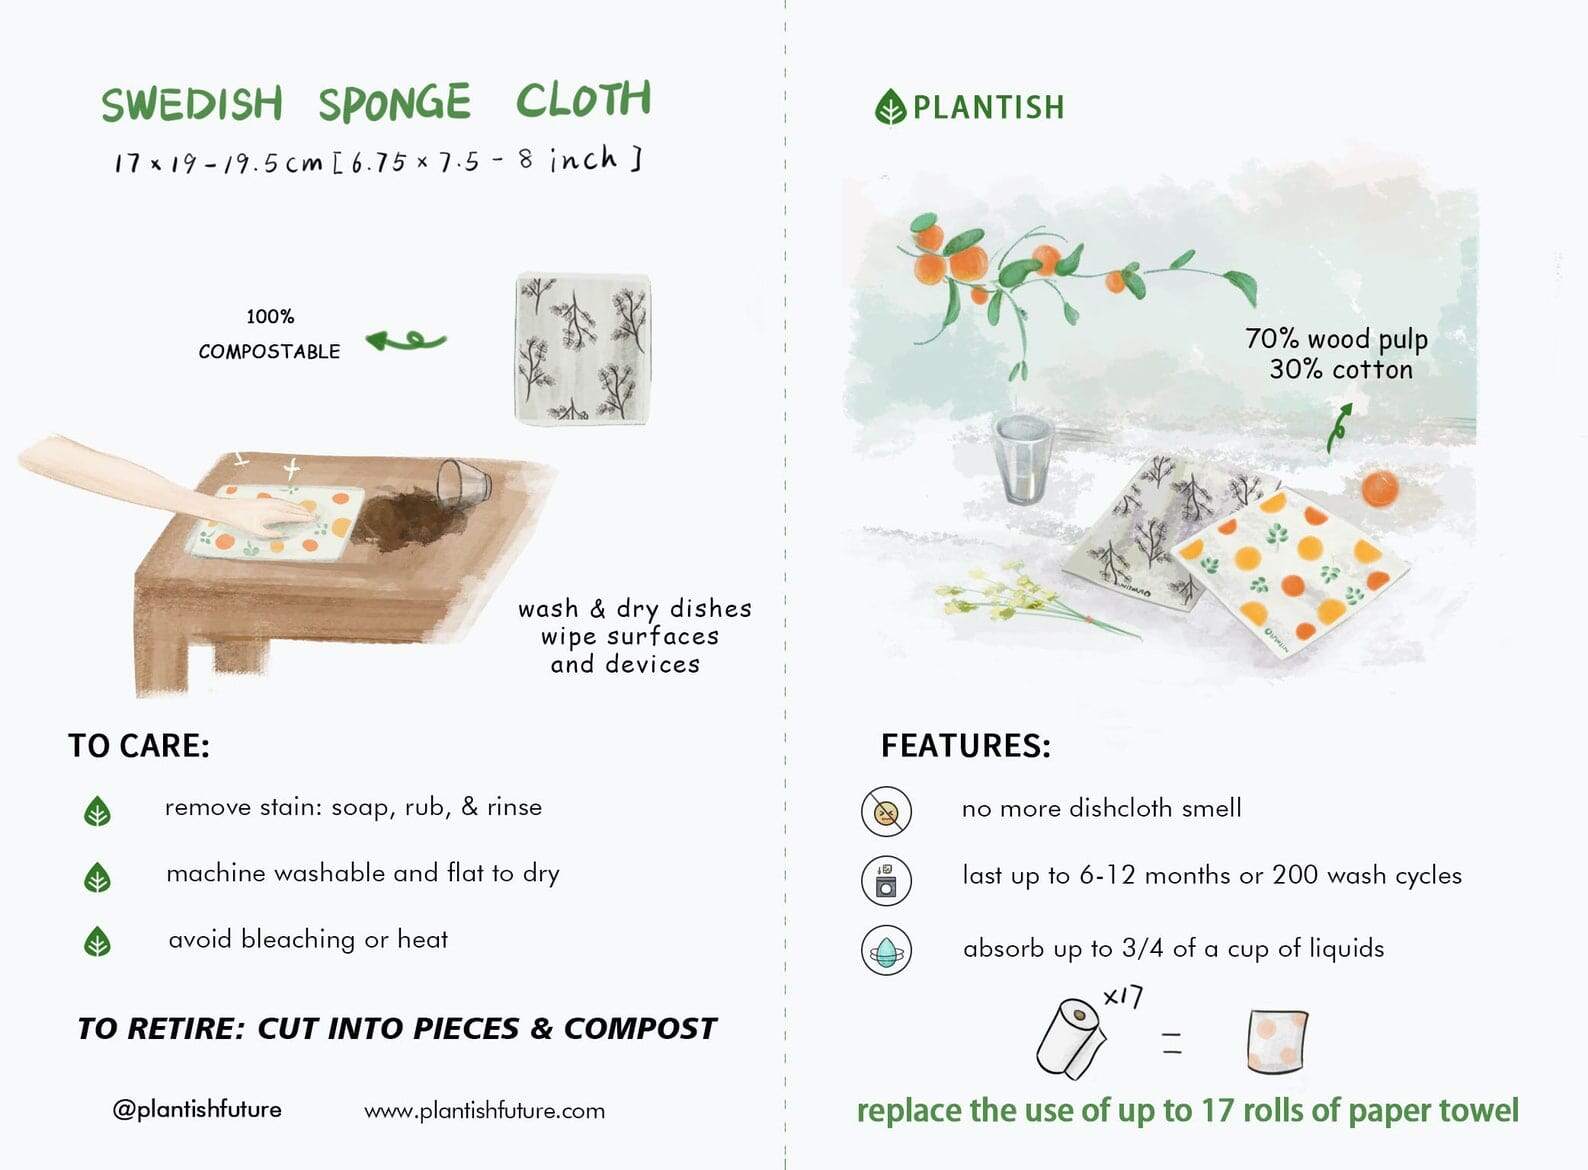 Care tips infographic for Swedish sponge cloth. Replace the use of up to 17 rolls of paper towel.